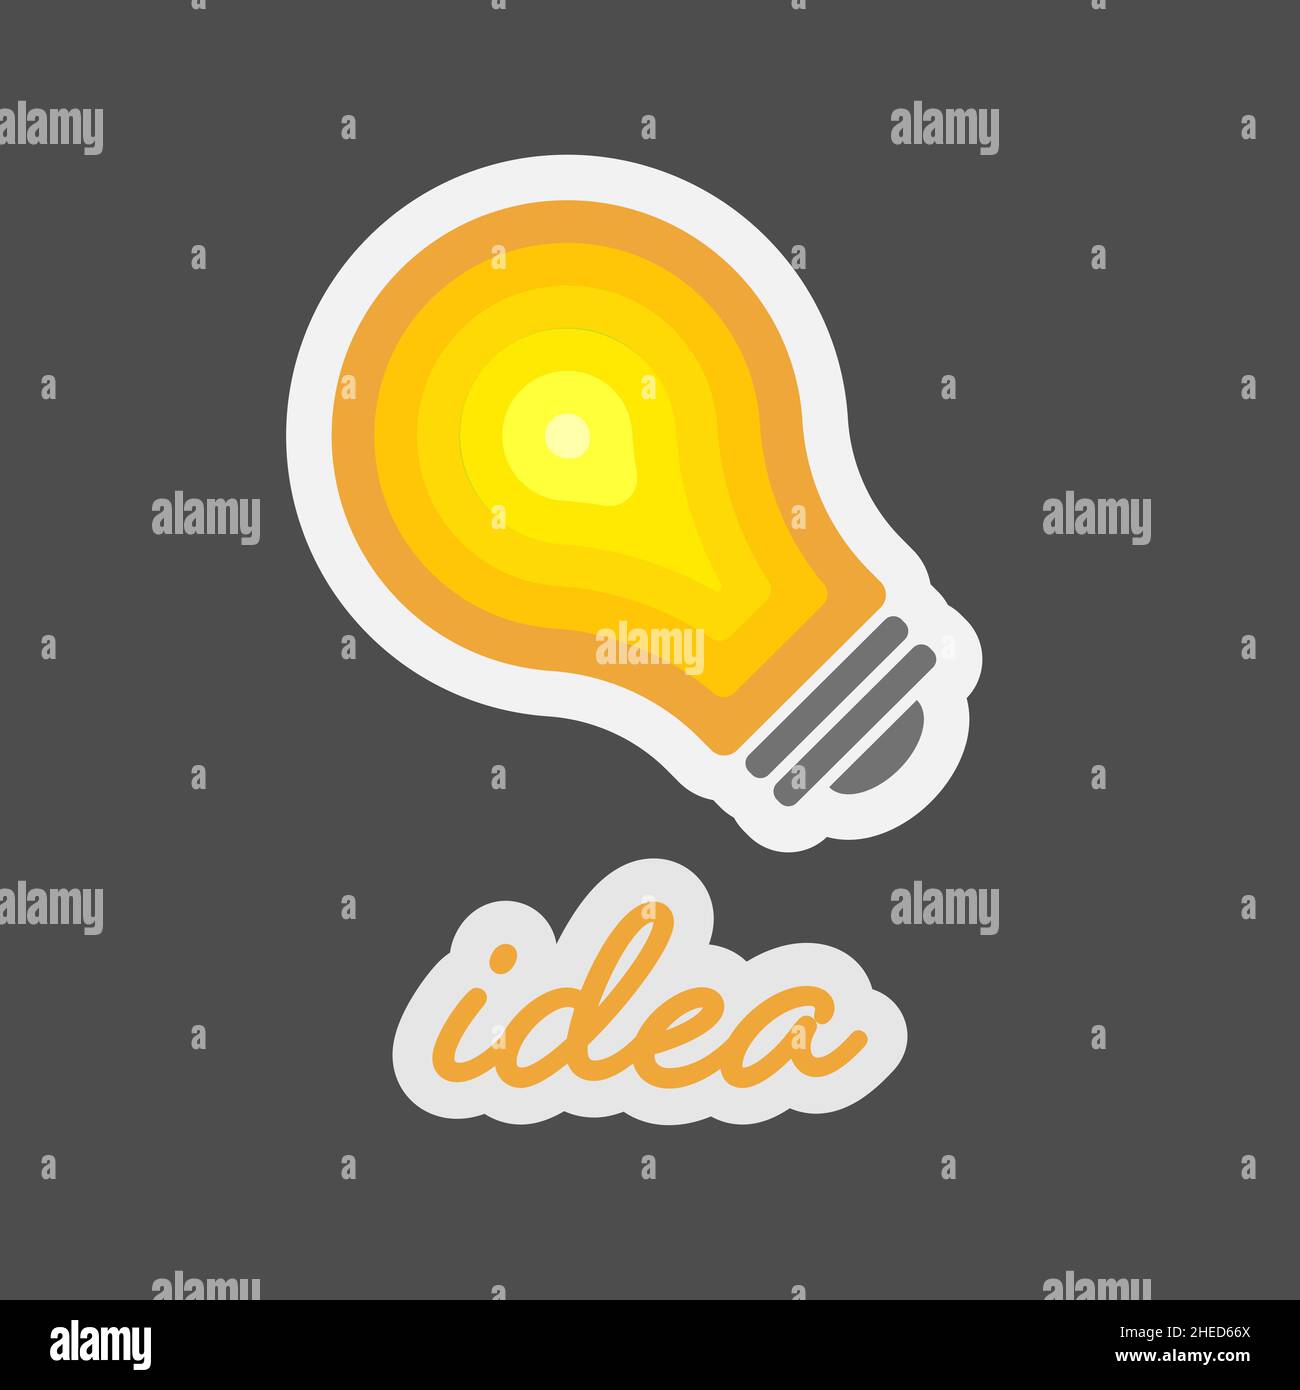 hand drawing light bulb and IDEA word design as concept Stock Photo - Alamy